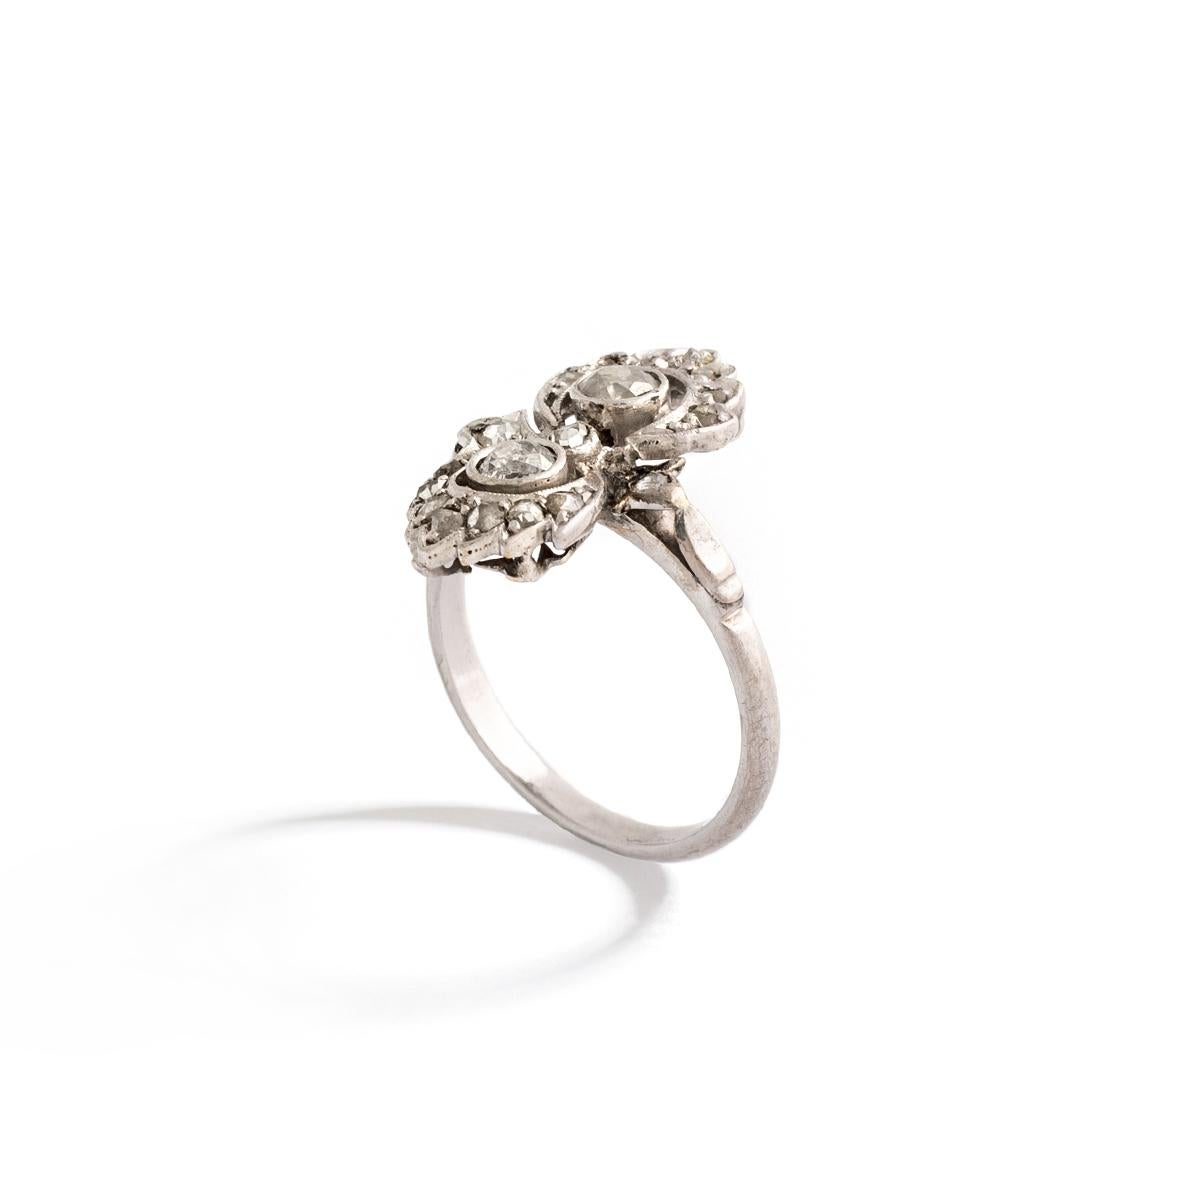 Platinum ring set with old and rose-cut diamonds.
Finger size: 49.
Gross weight: 3.00g.
